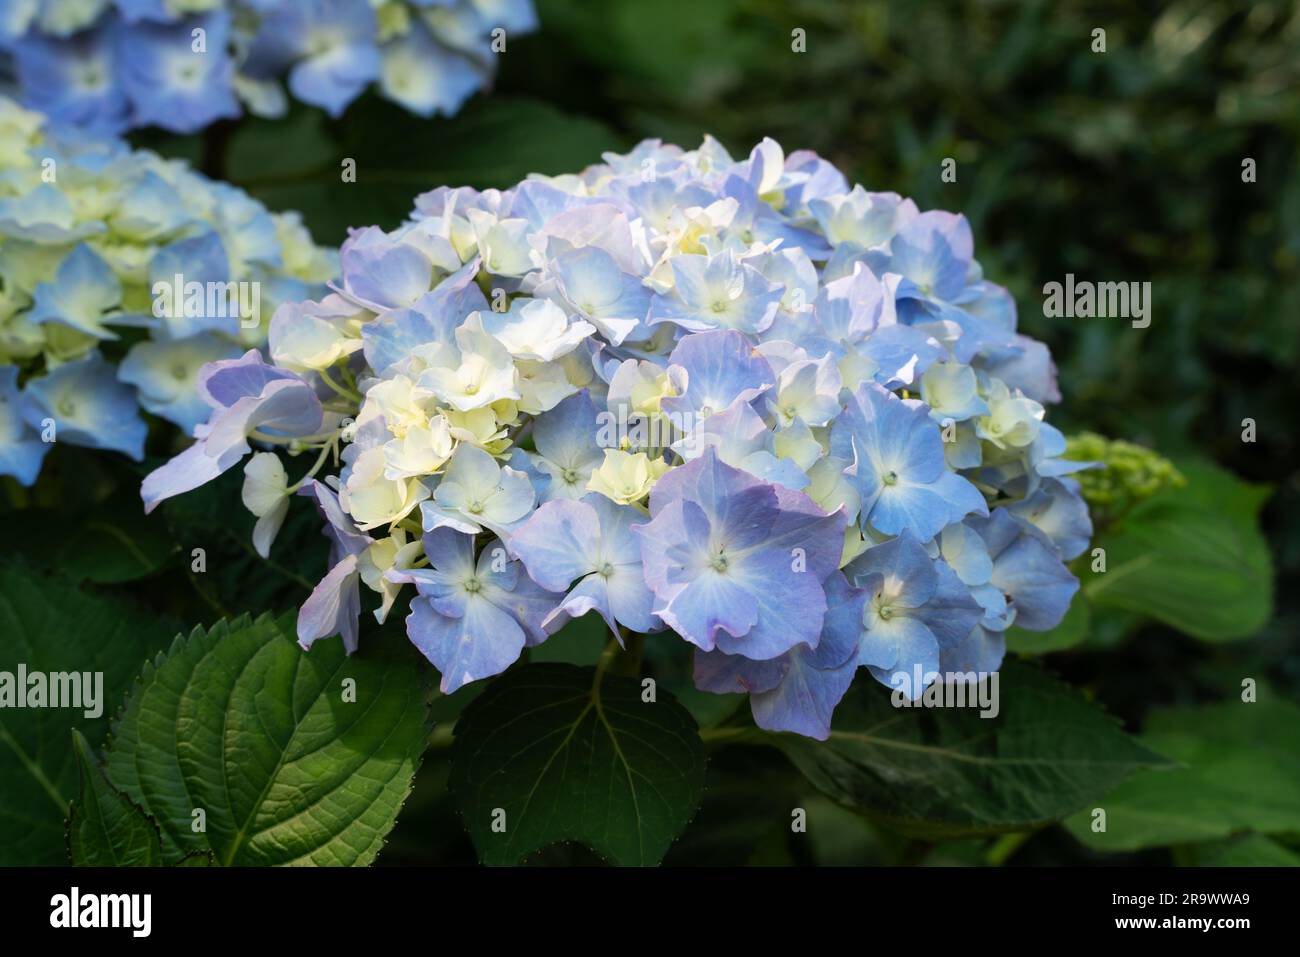 Beautiful pastel blue and purple hydrangea flower plant in a natural garden in sunny day. Stock Photo